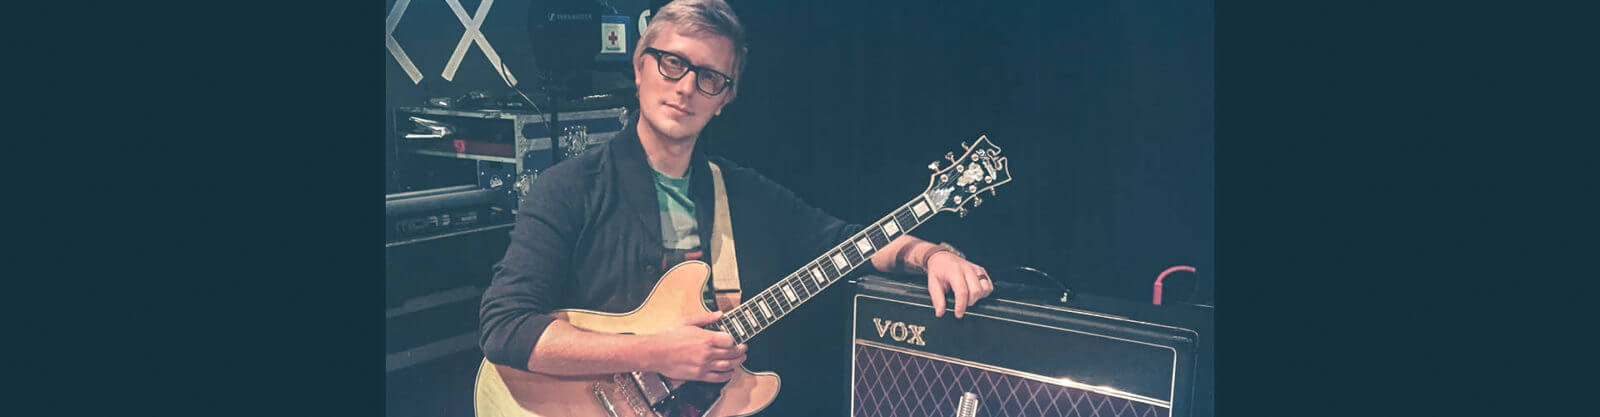 male musician holding electric guitar beside VOX amplifier